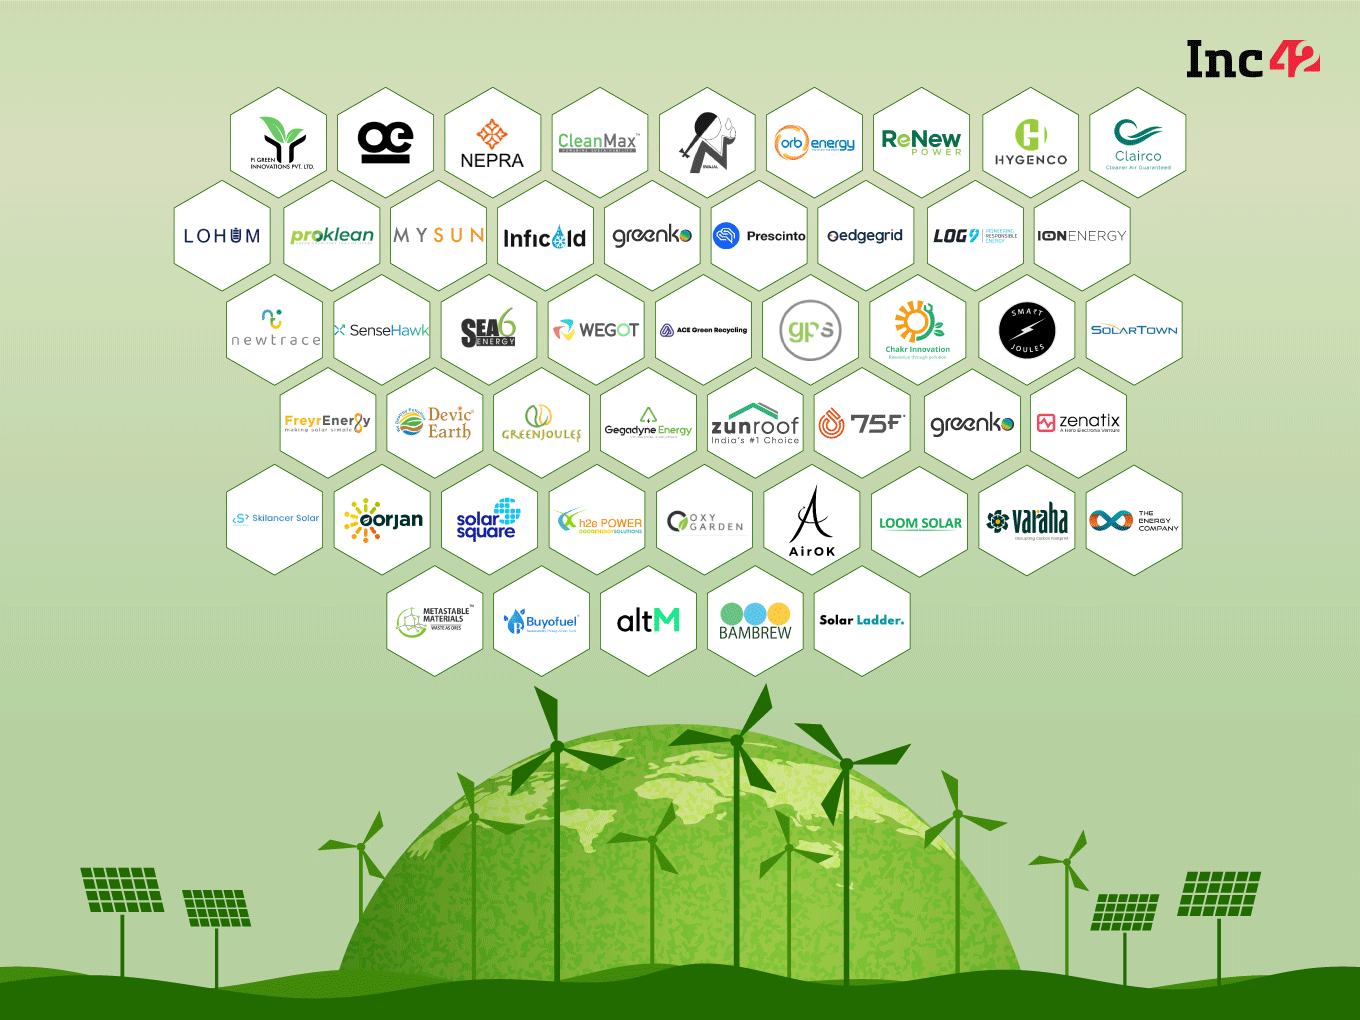 Inc42 has compiled a list of 49 cleantech startups, which have come up with unique solutions to contribute to India’s clean energy goal.